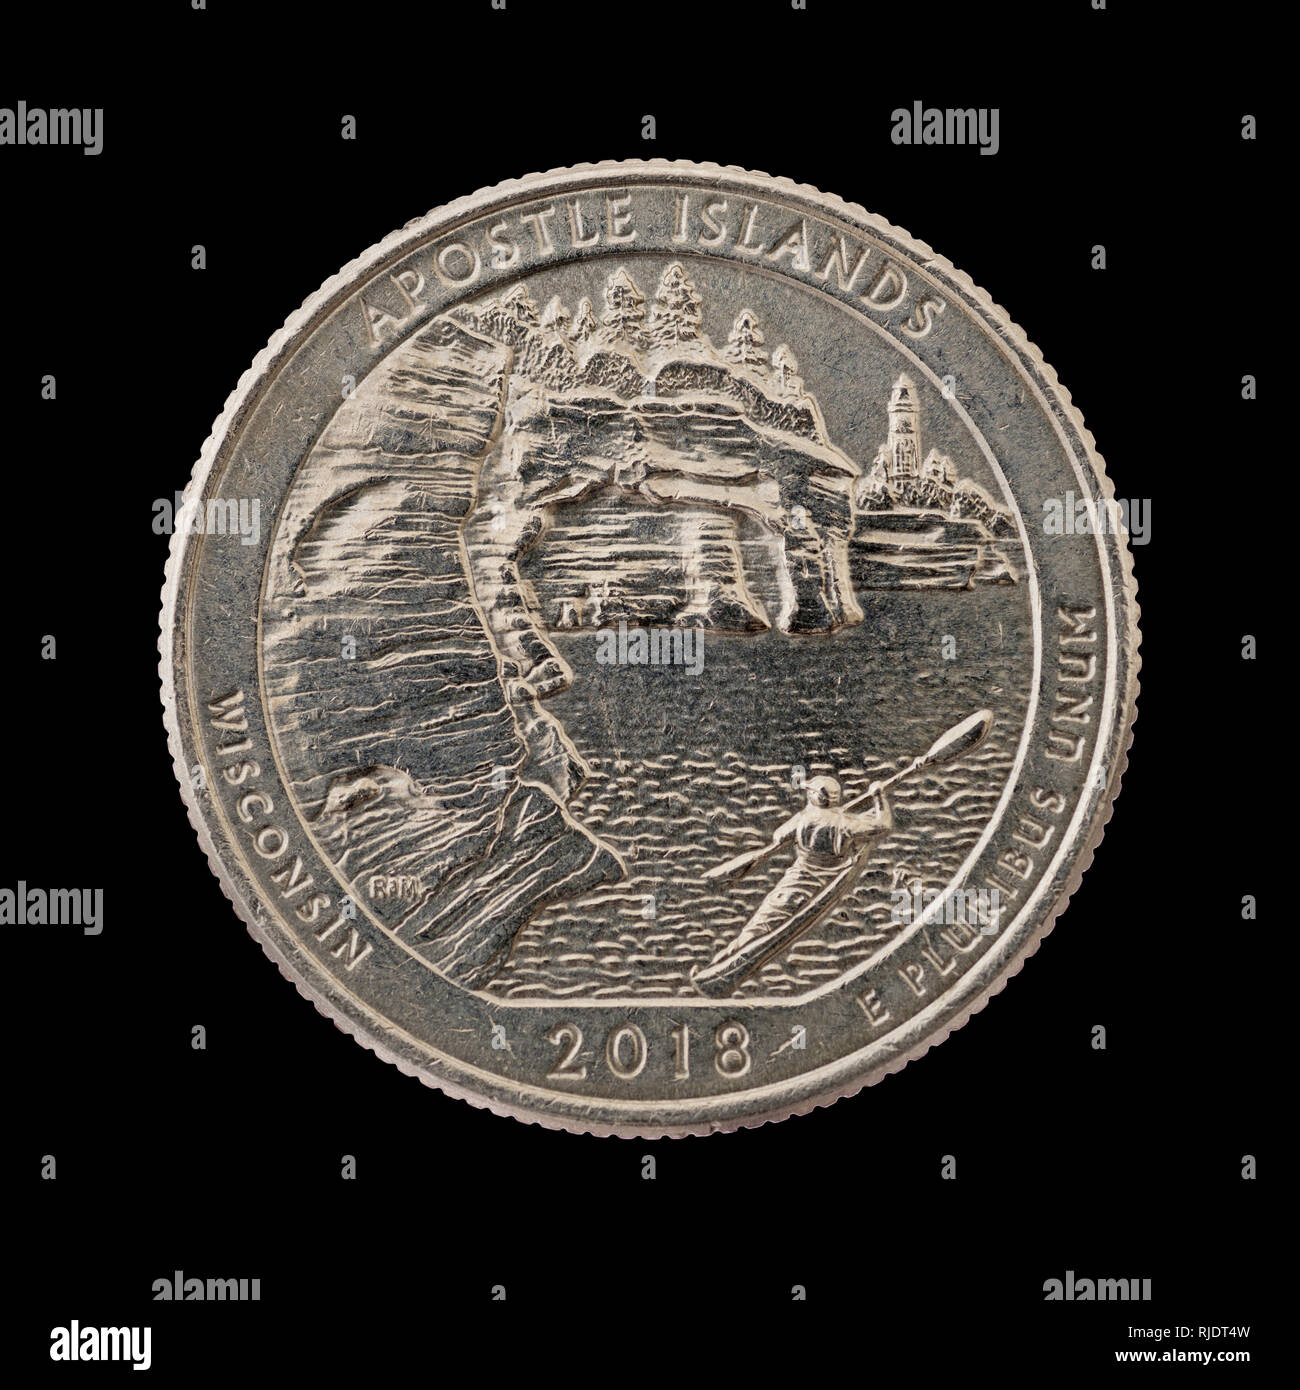 Apostle Islands Wisconsin commemorative quarter coin isolated on black Stock Photo